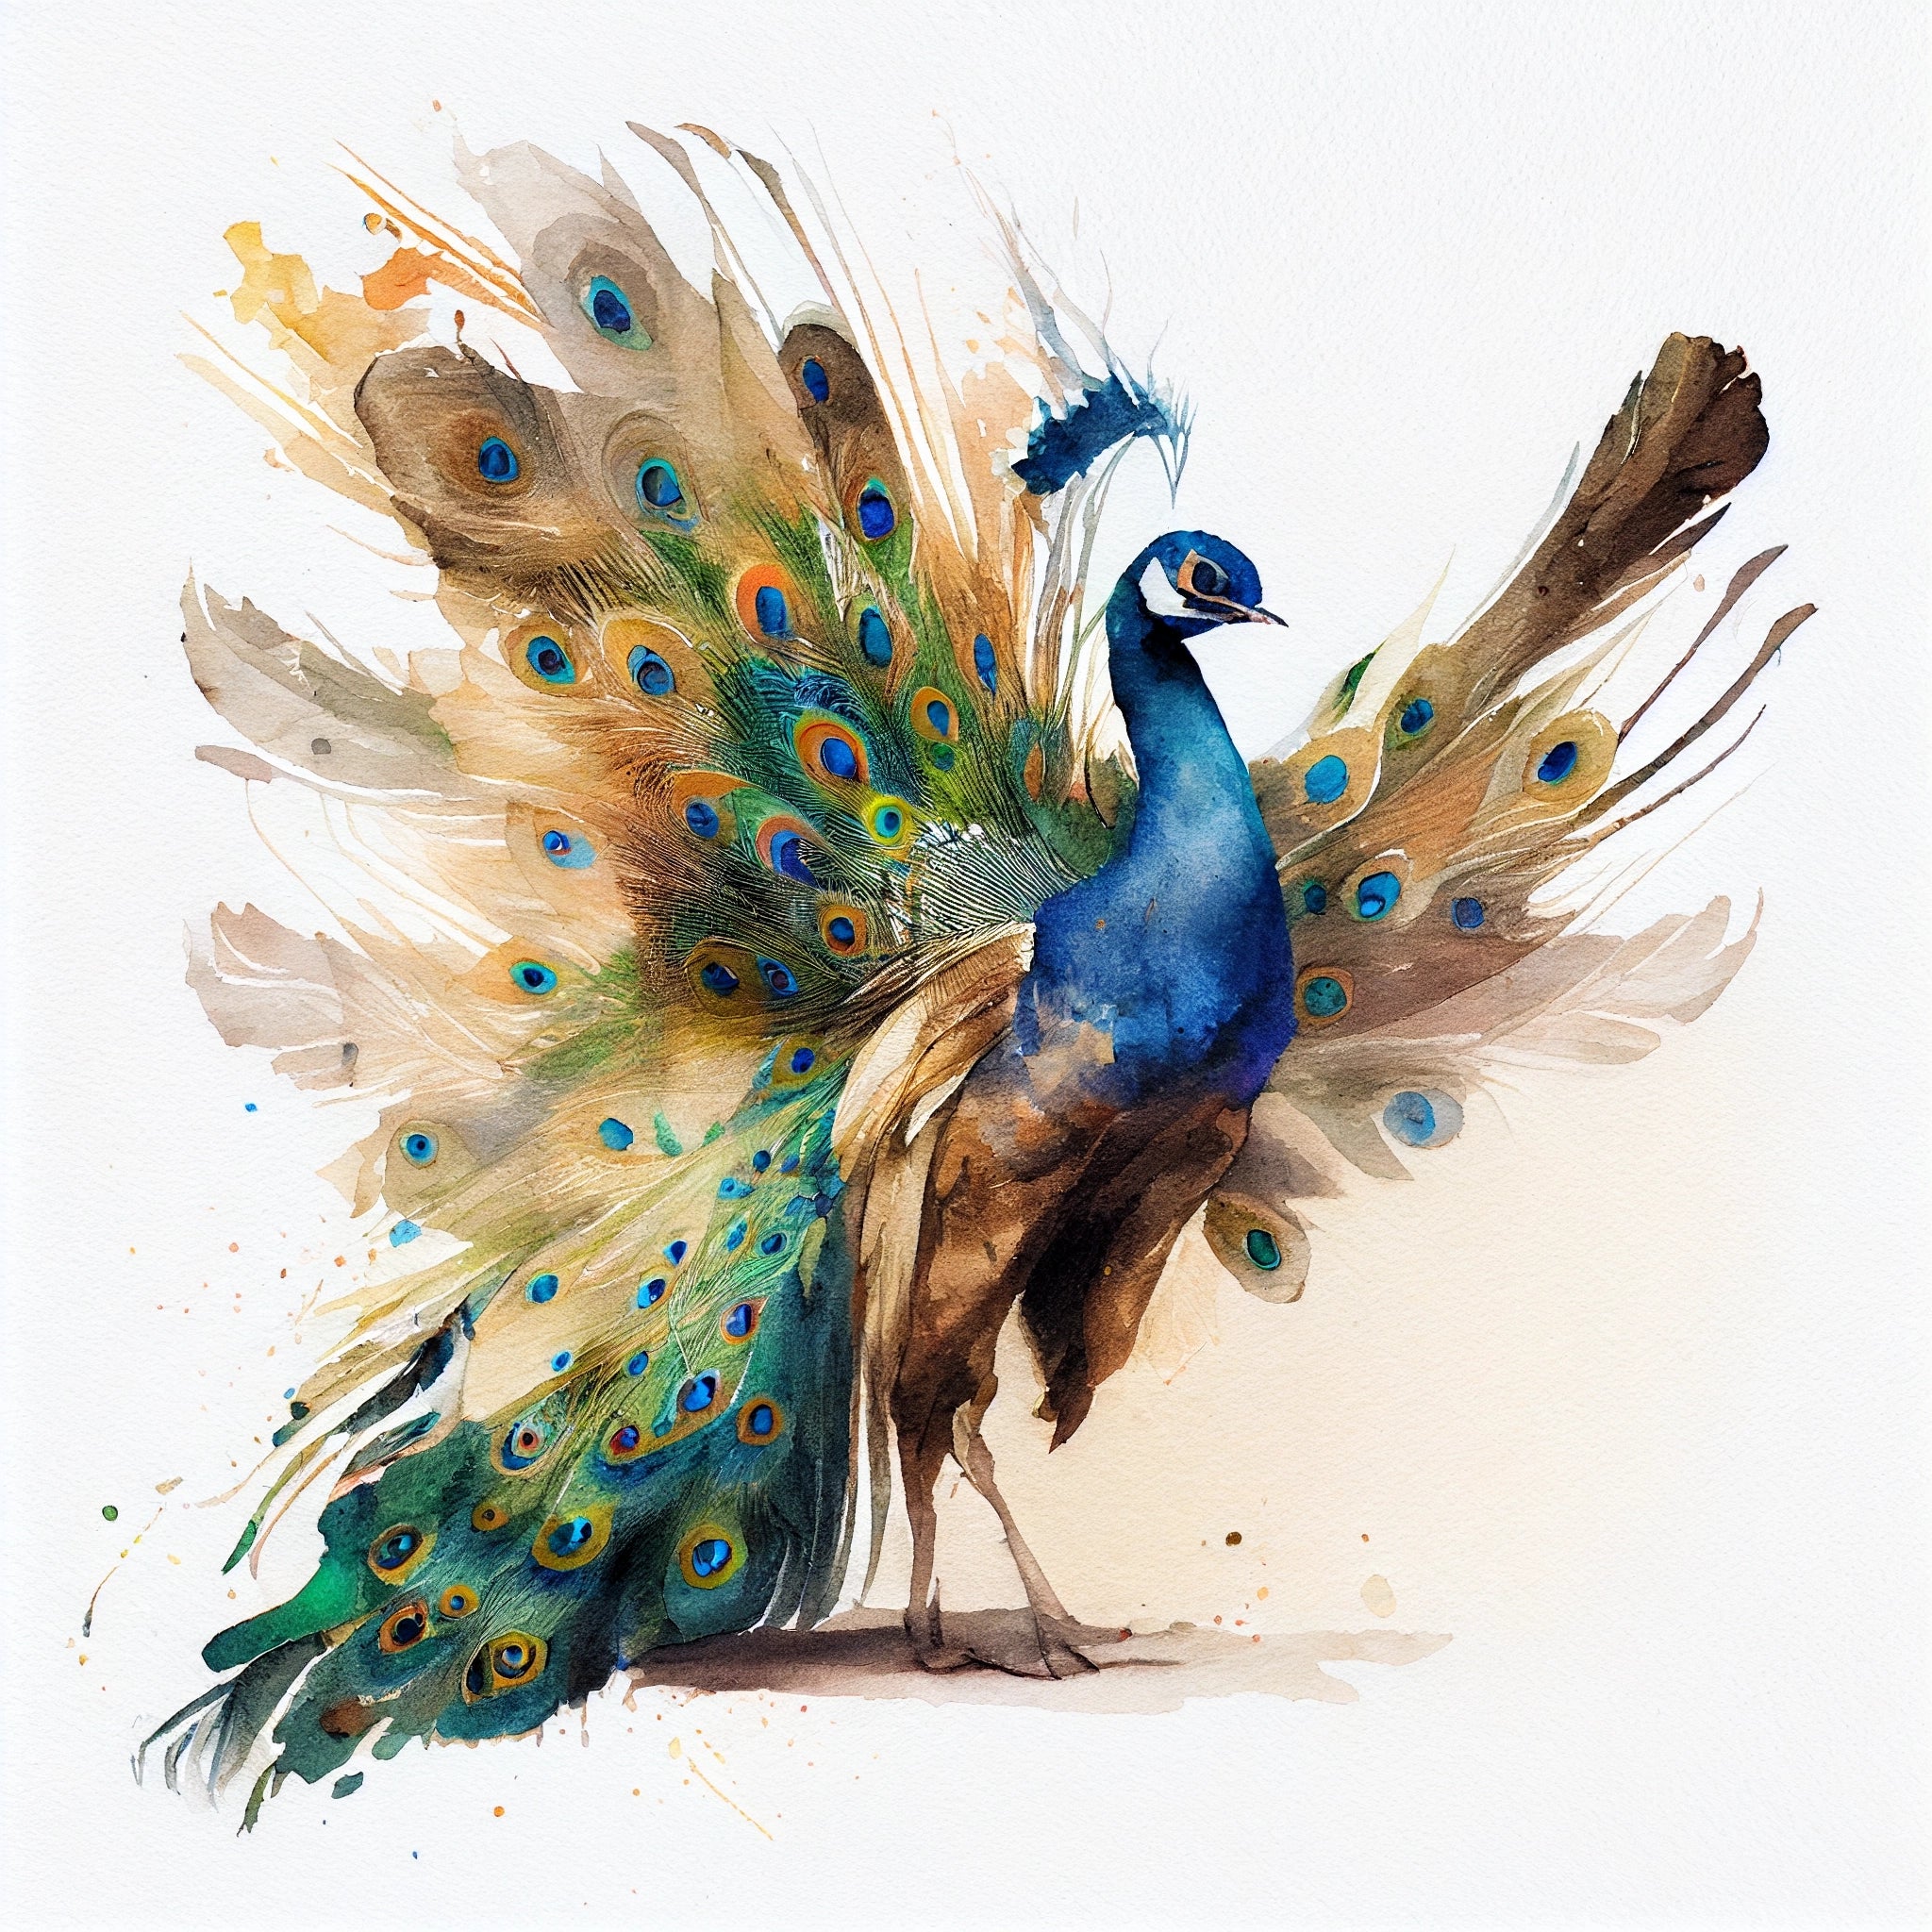 "Mesmerizing Plumage: Watercolor Print of a Beautiful Peacock for Stunning Home and Office Decor"